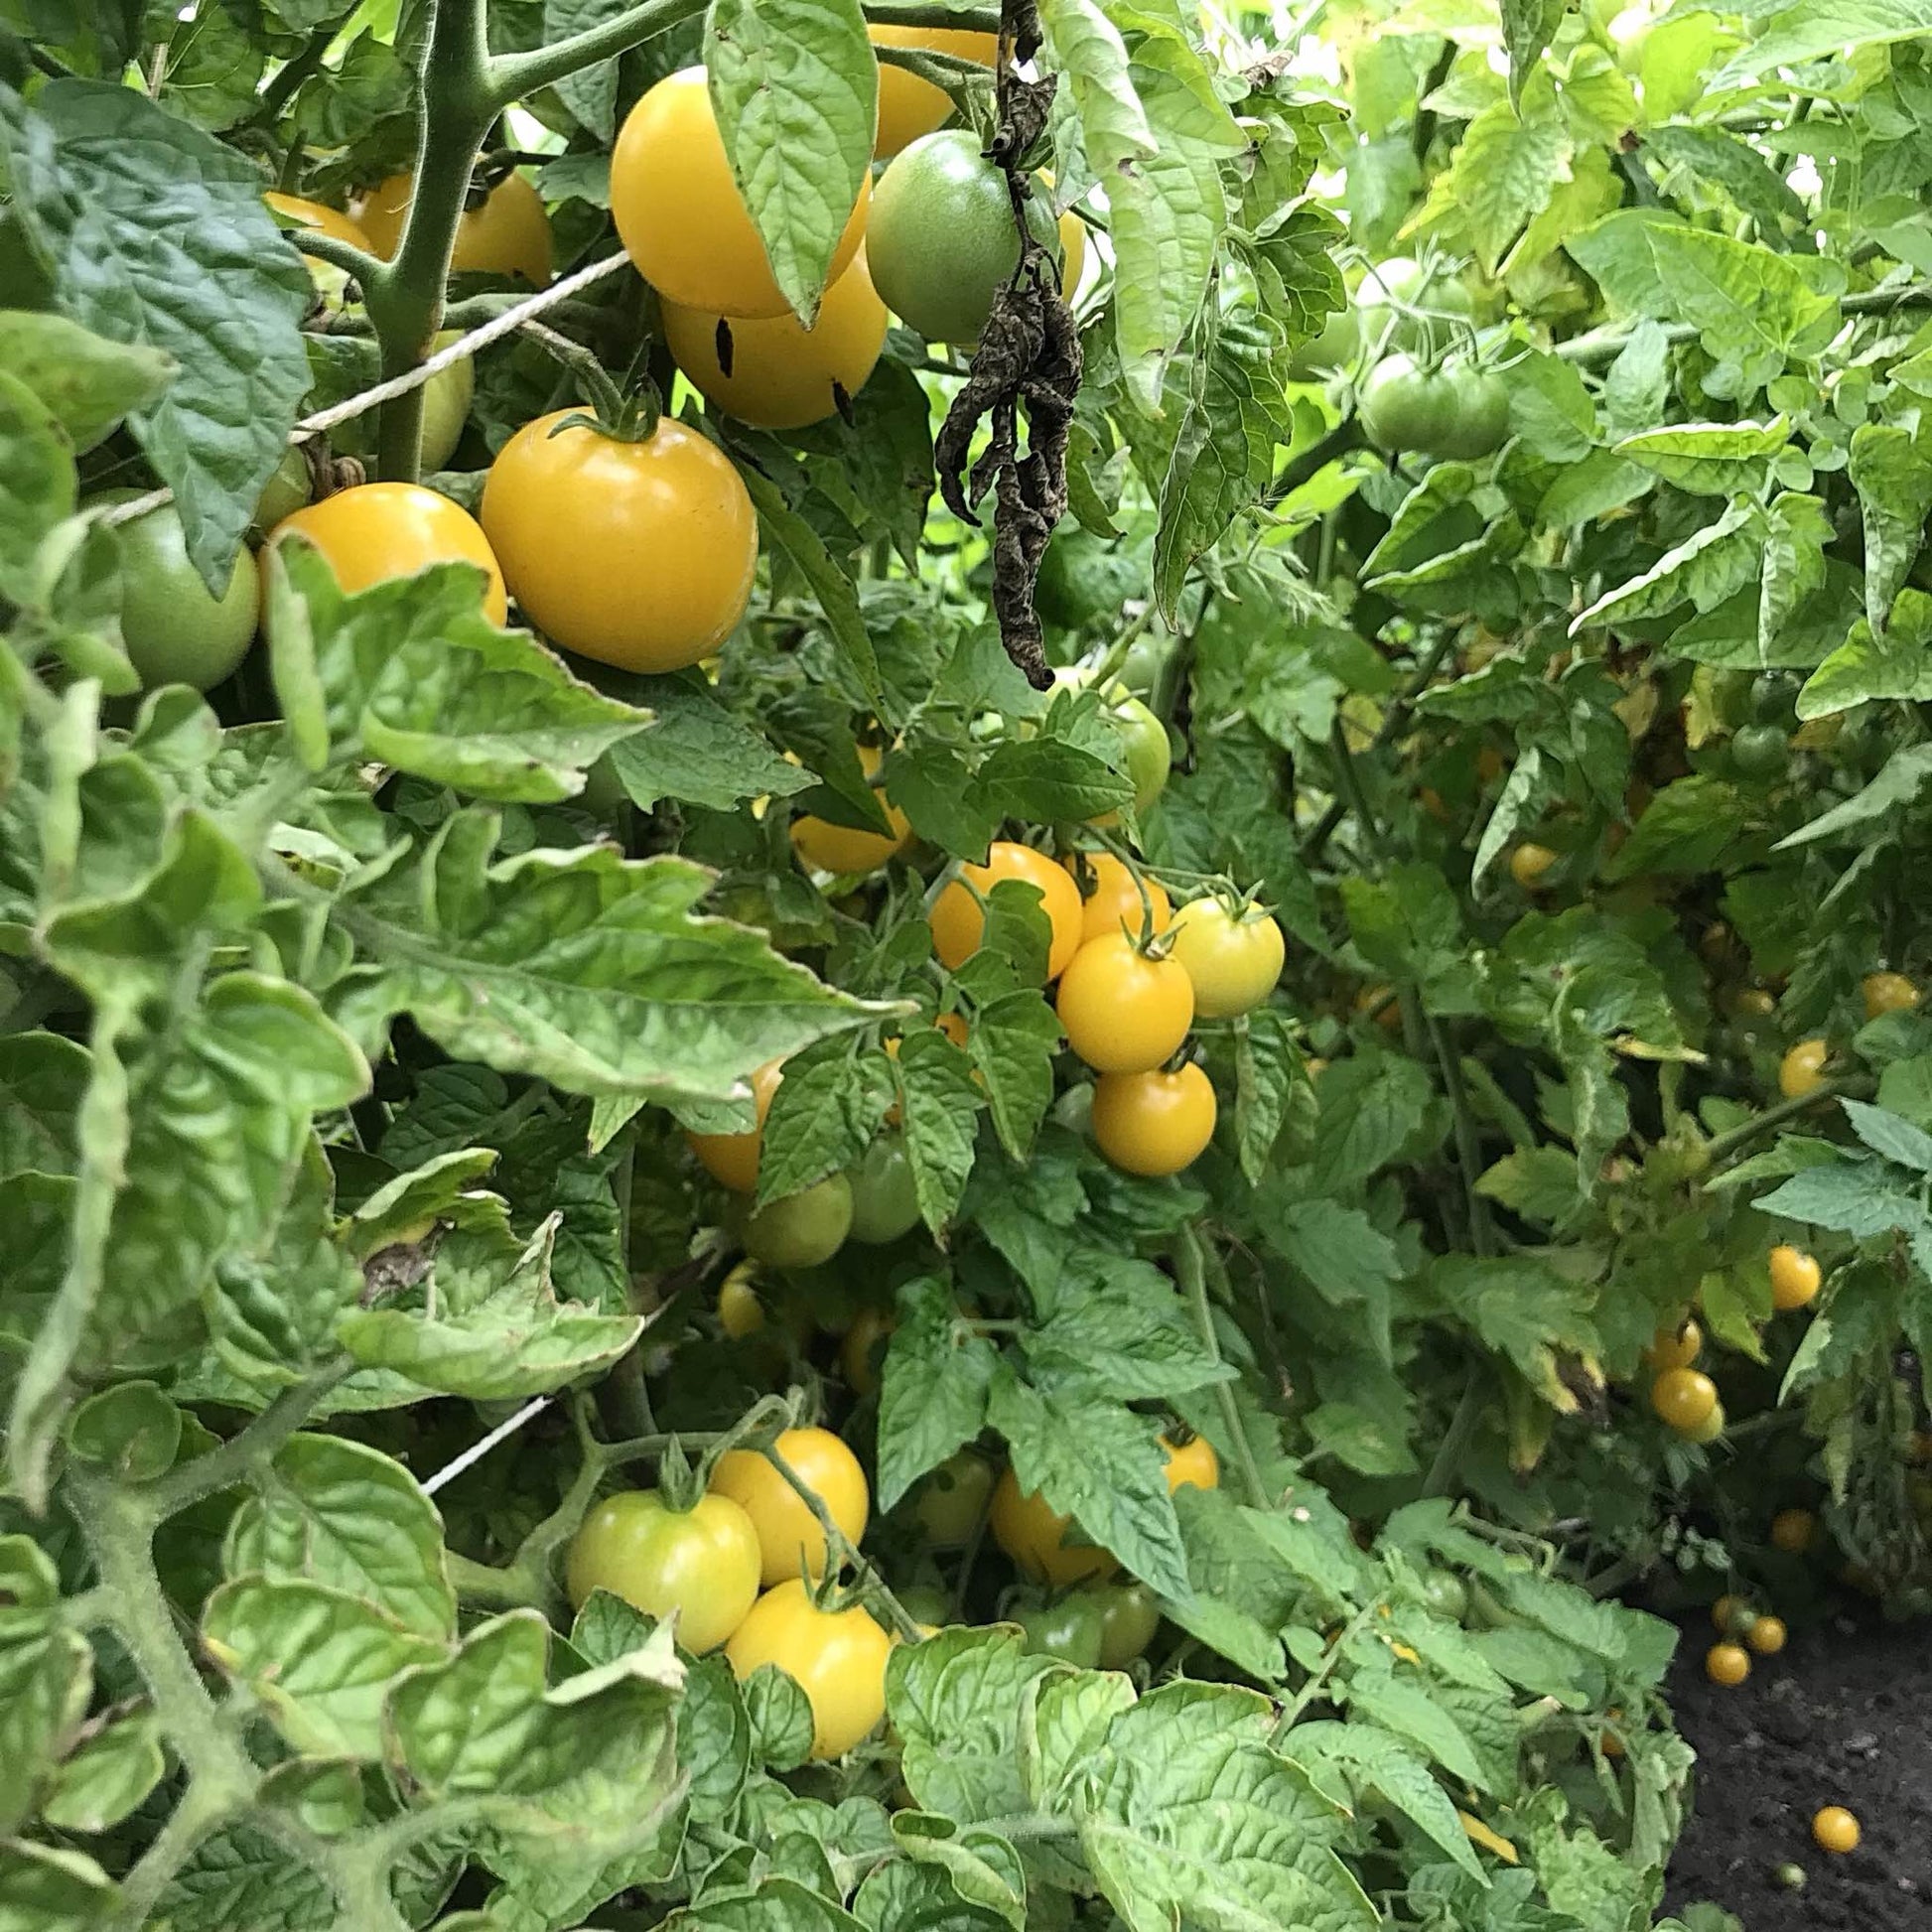 eagle smiley tomatoes on the vine